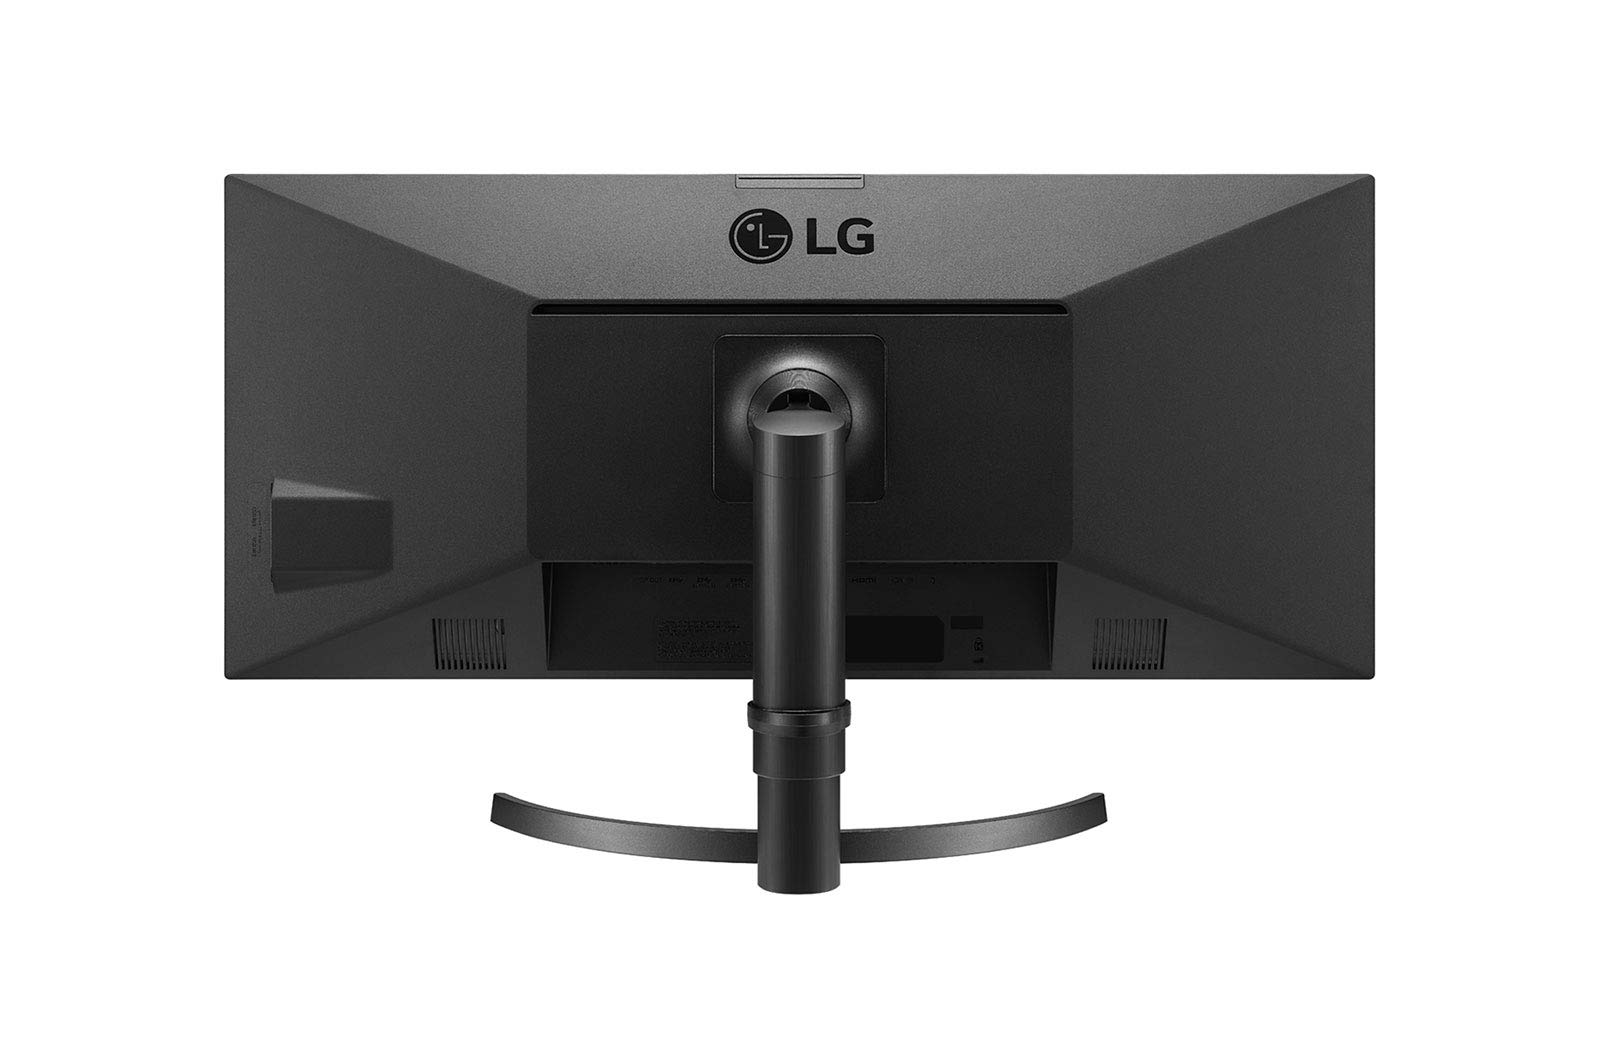 LG 34” 34CN650N-6A UltraWide FHD All-in-One Thin Client (2560 x 1080) with IPS Display, Quad-core Intel Celeron J4105 Processor, USB Type-C